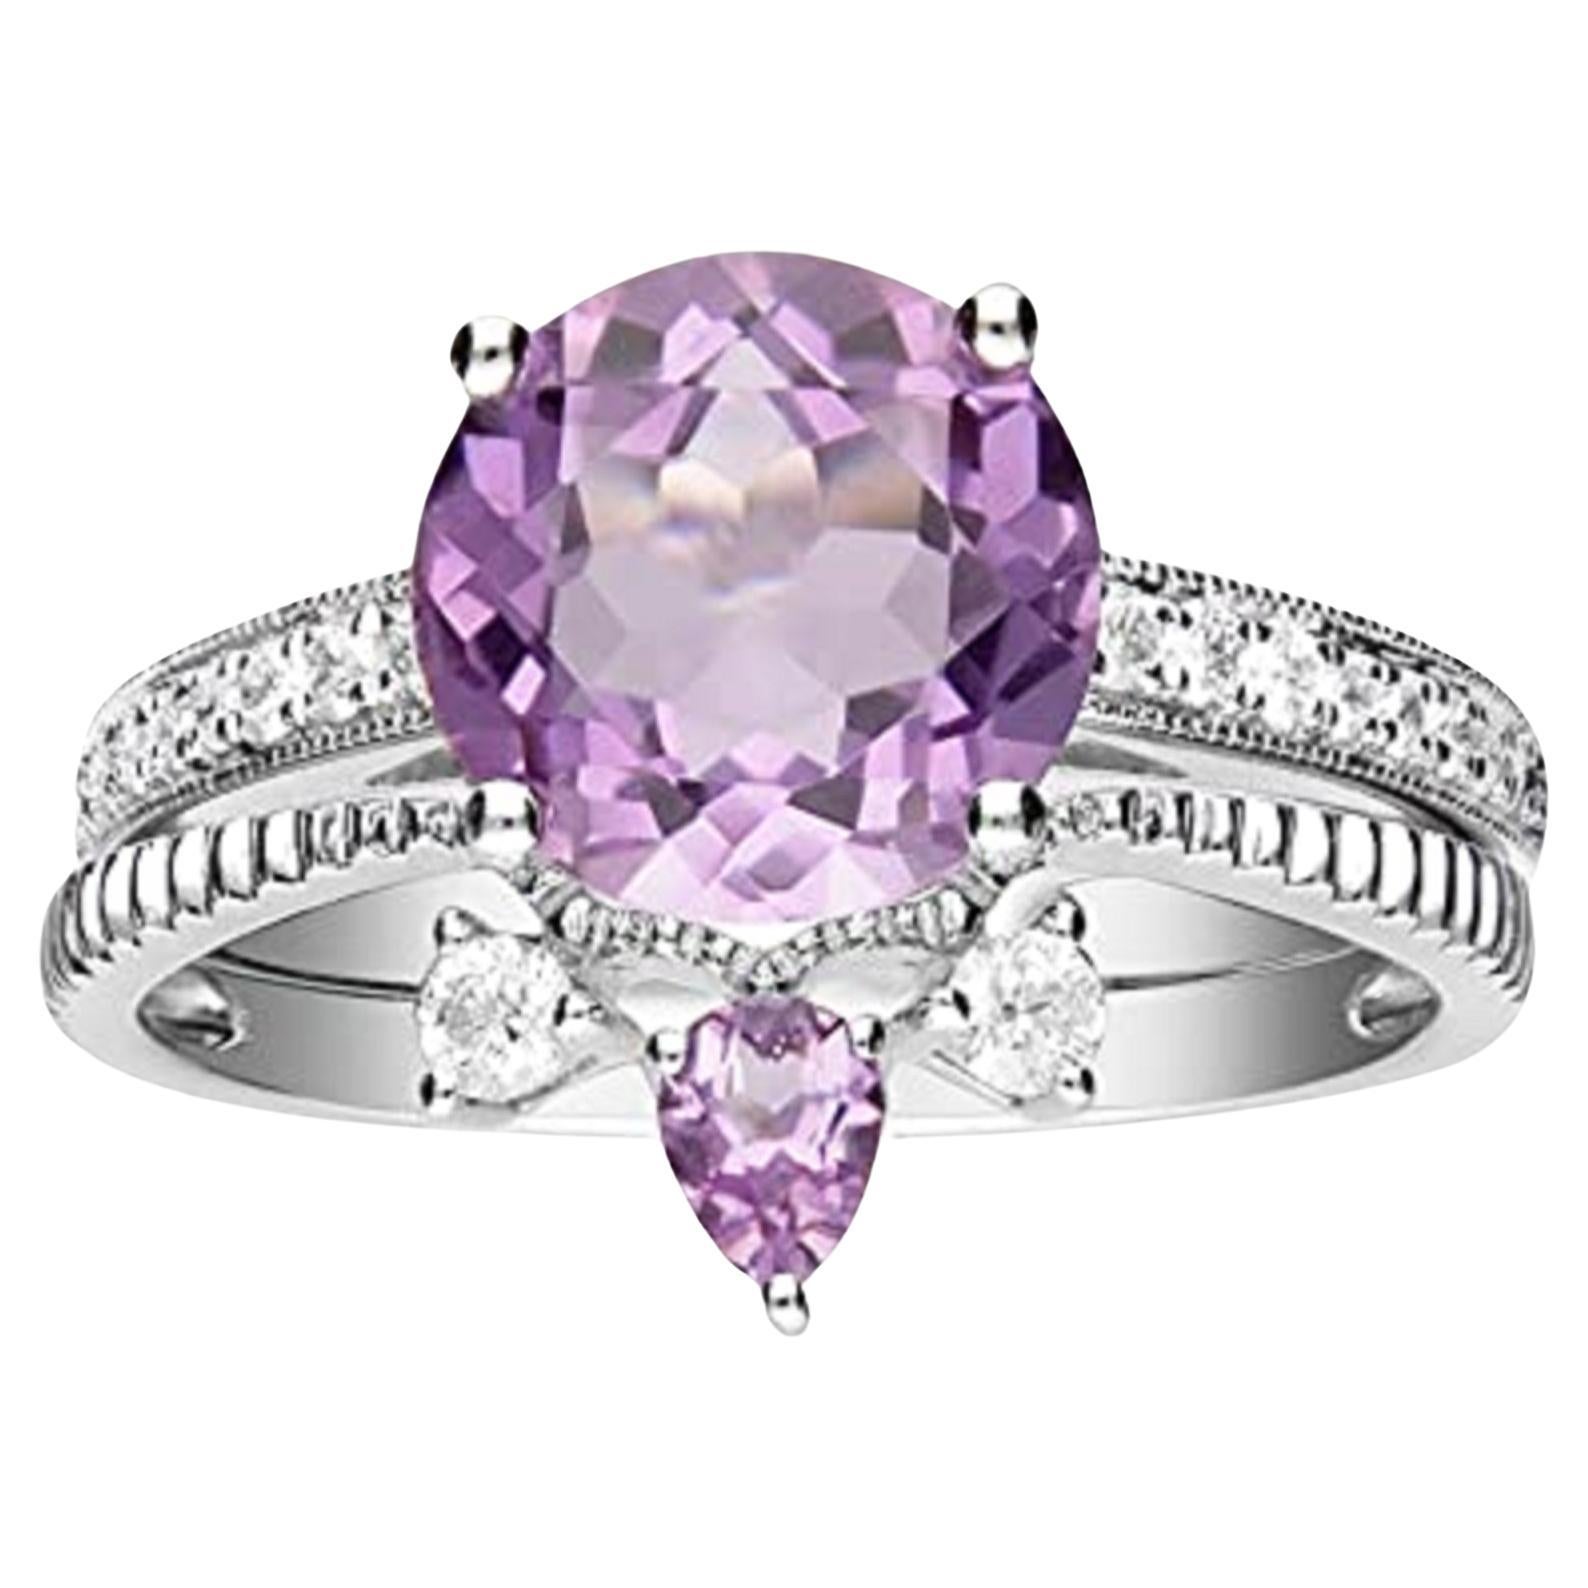 Gin & Grace 14K White Gold Diamond Ring (I1) with Pink Amethyst For Women For Sale